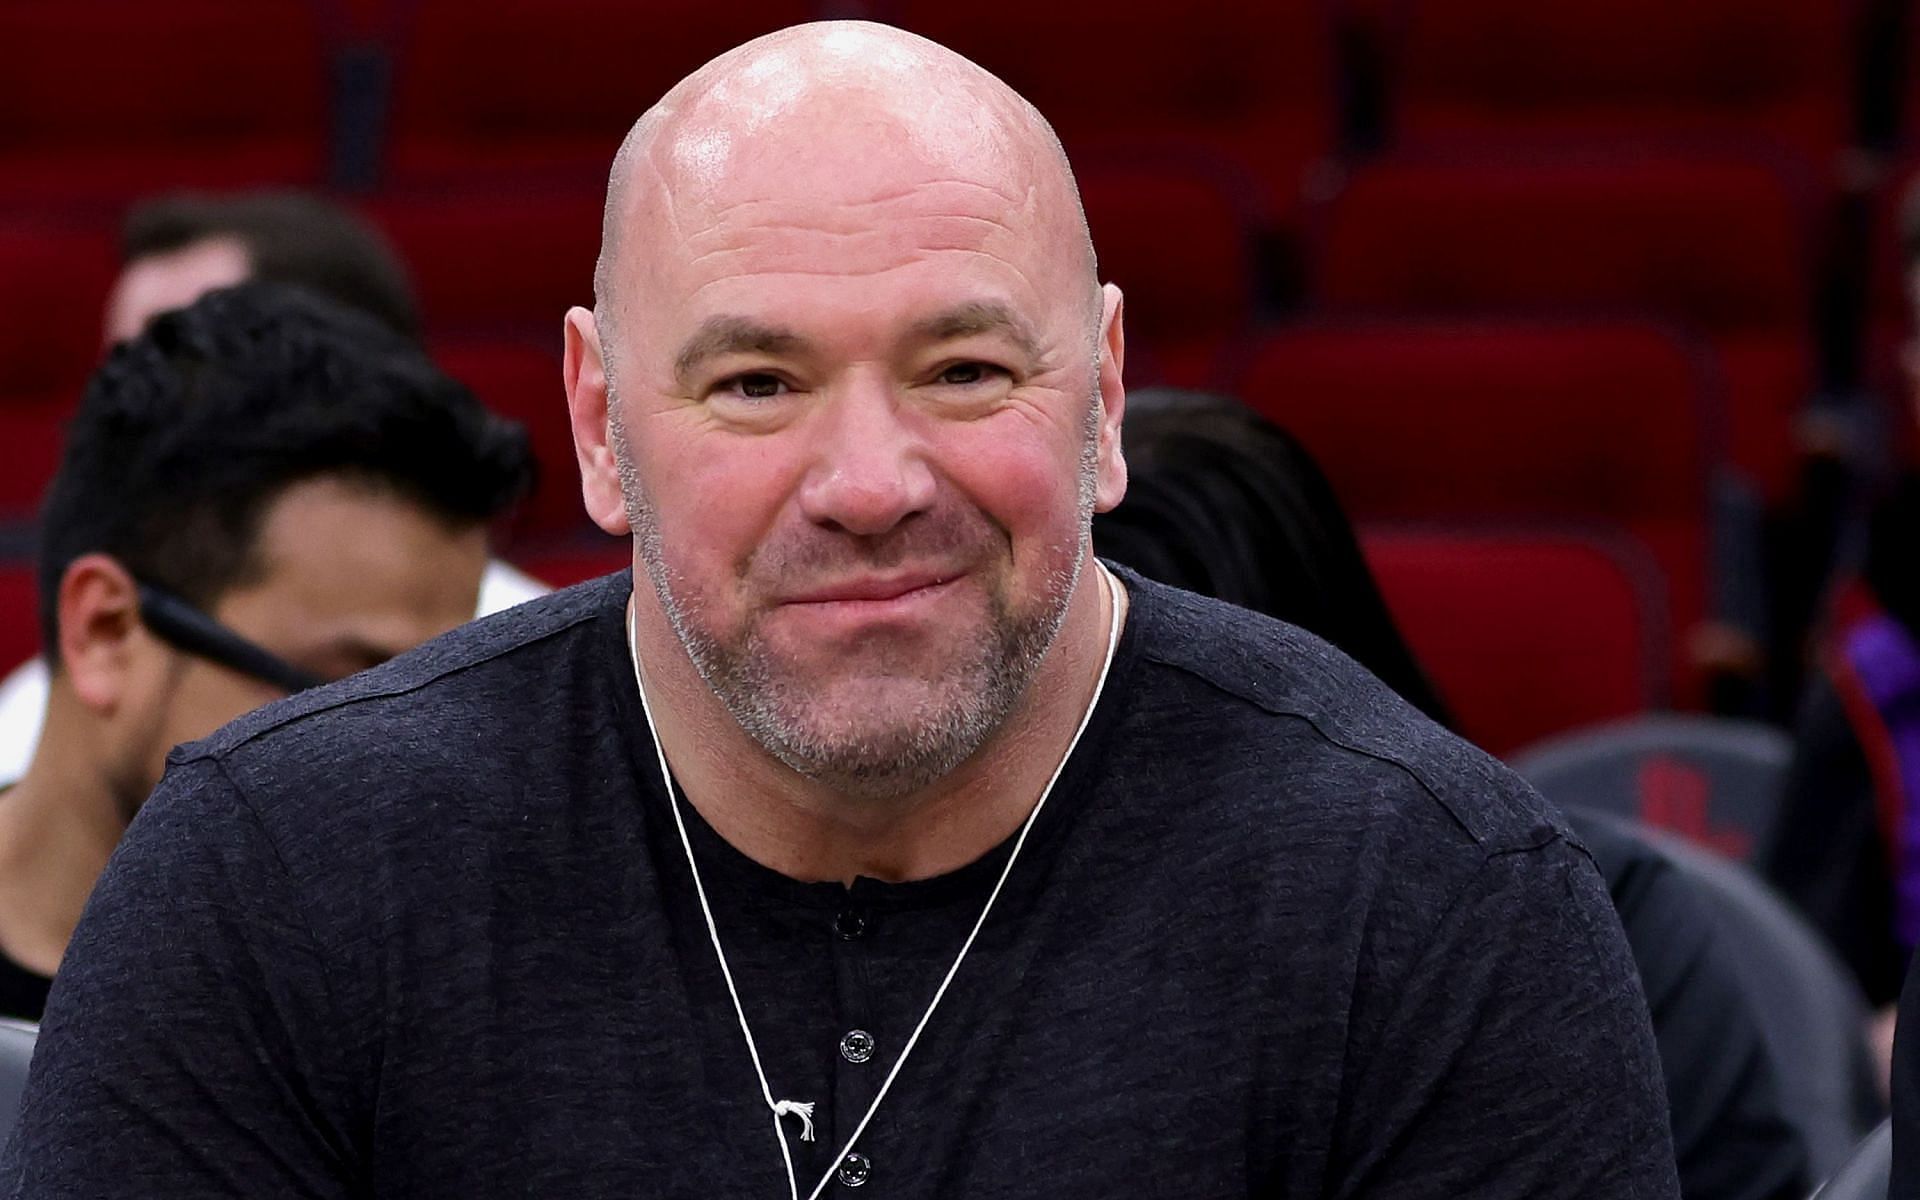 Dana White reveals his two biggest pet peeves with regards to avoiding fights in the UFC